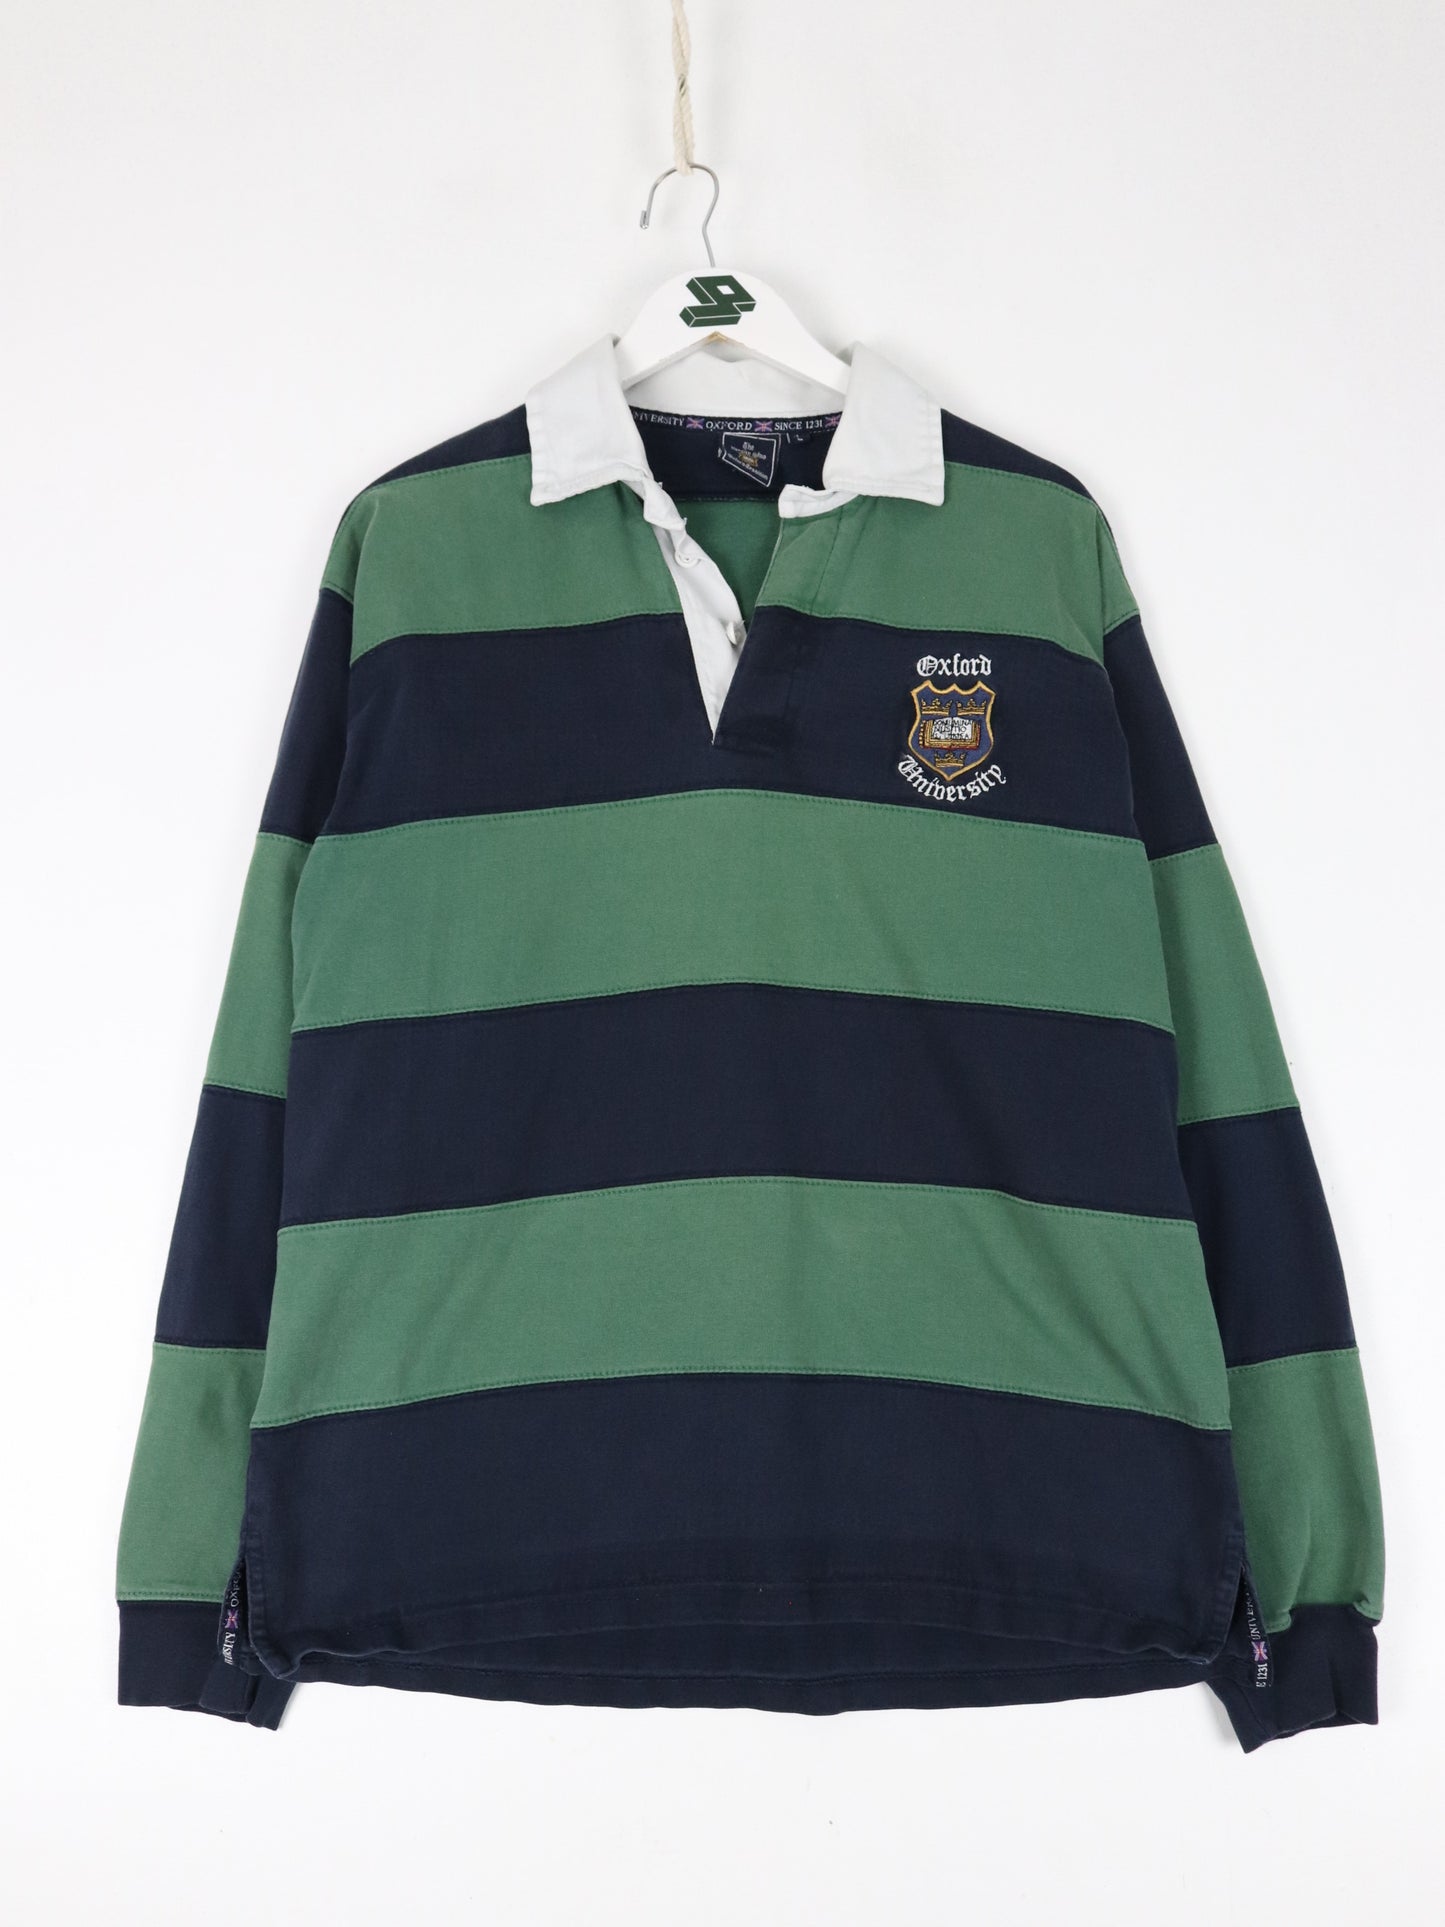 Oxford University Shirt Mens Large Blue Green Striped Rugby